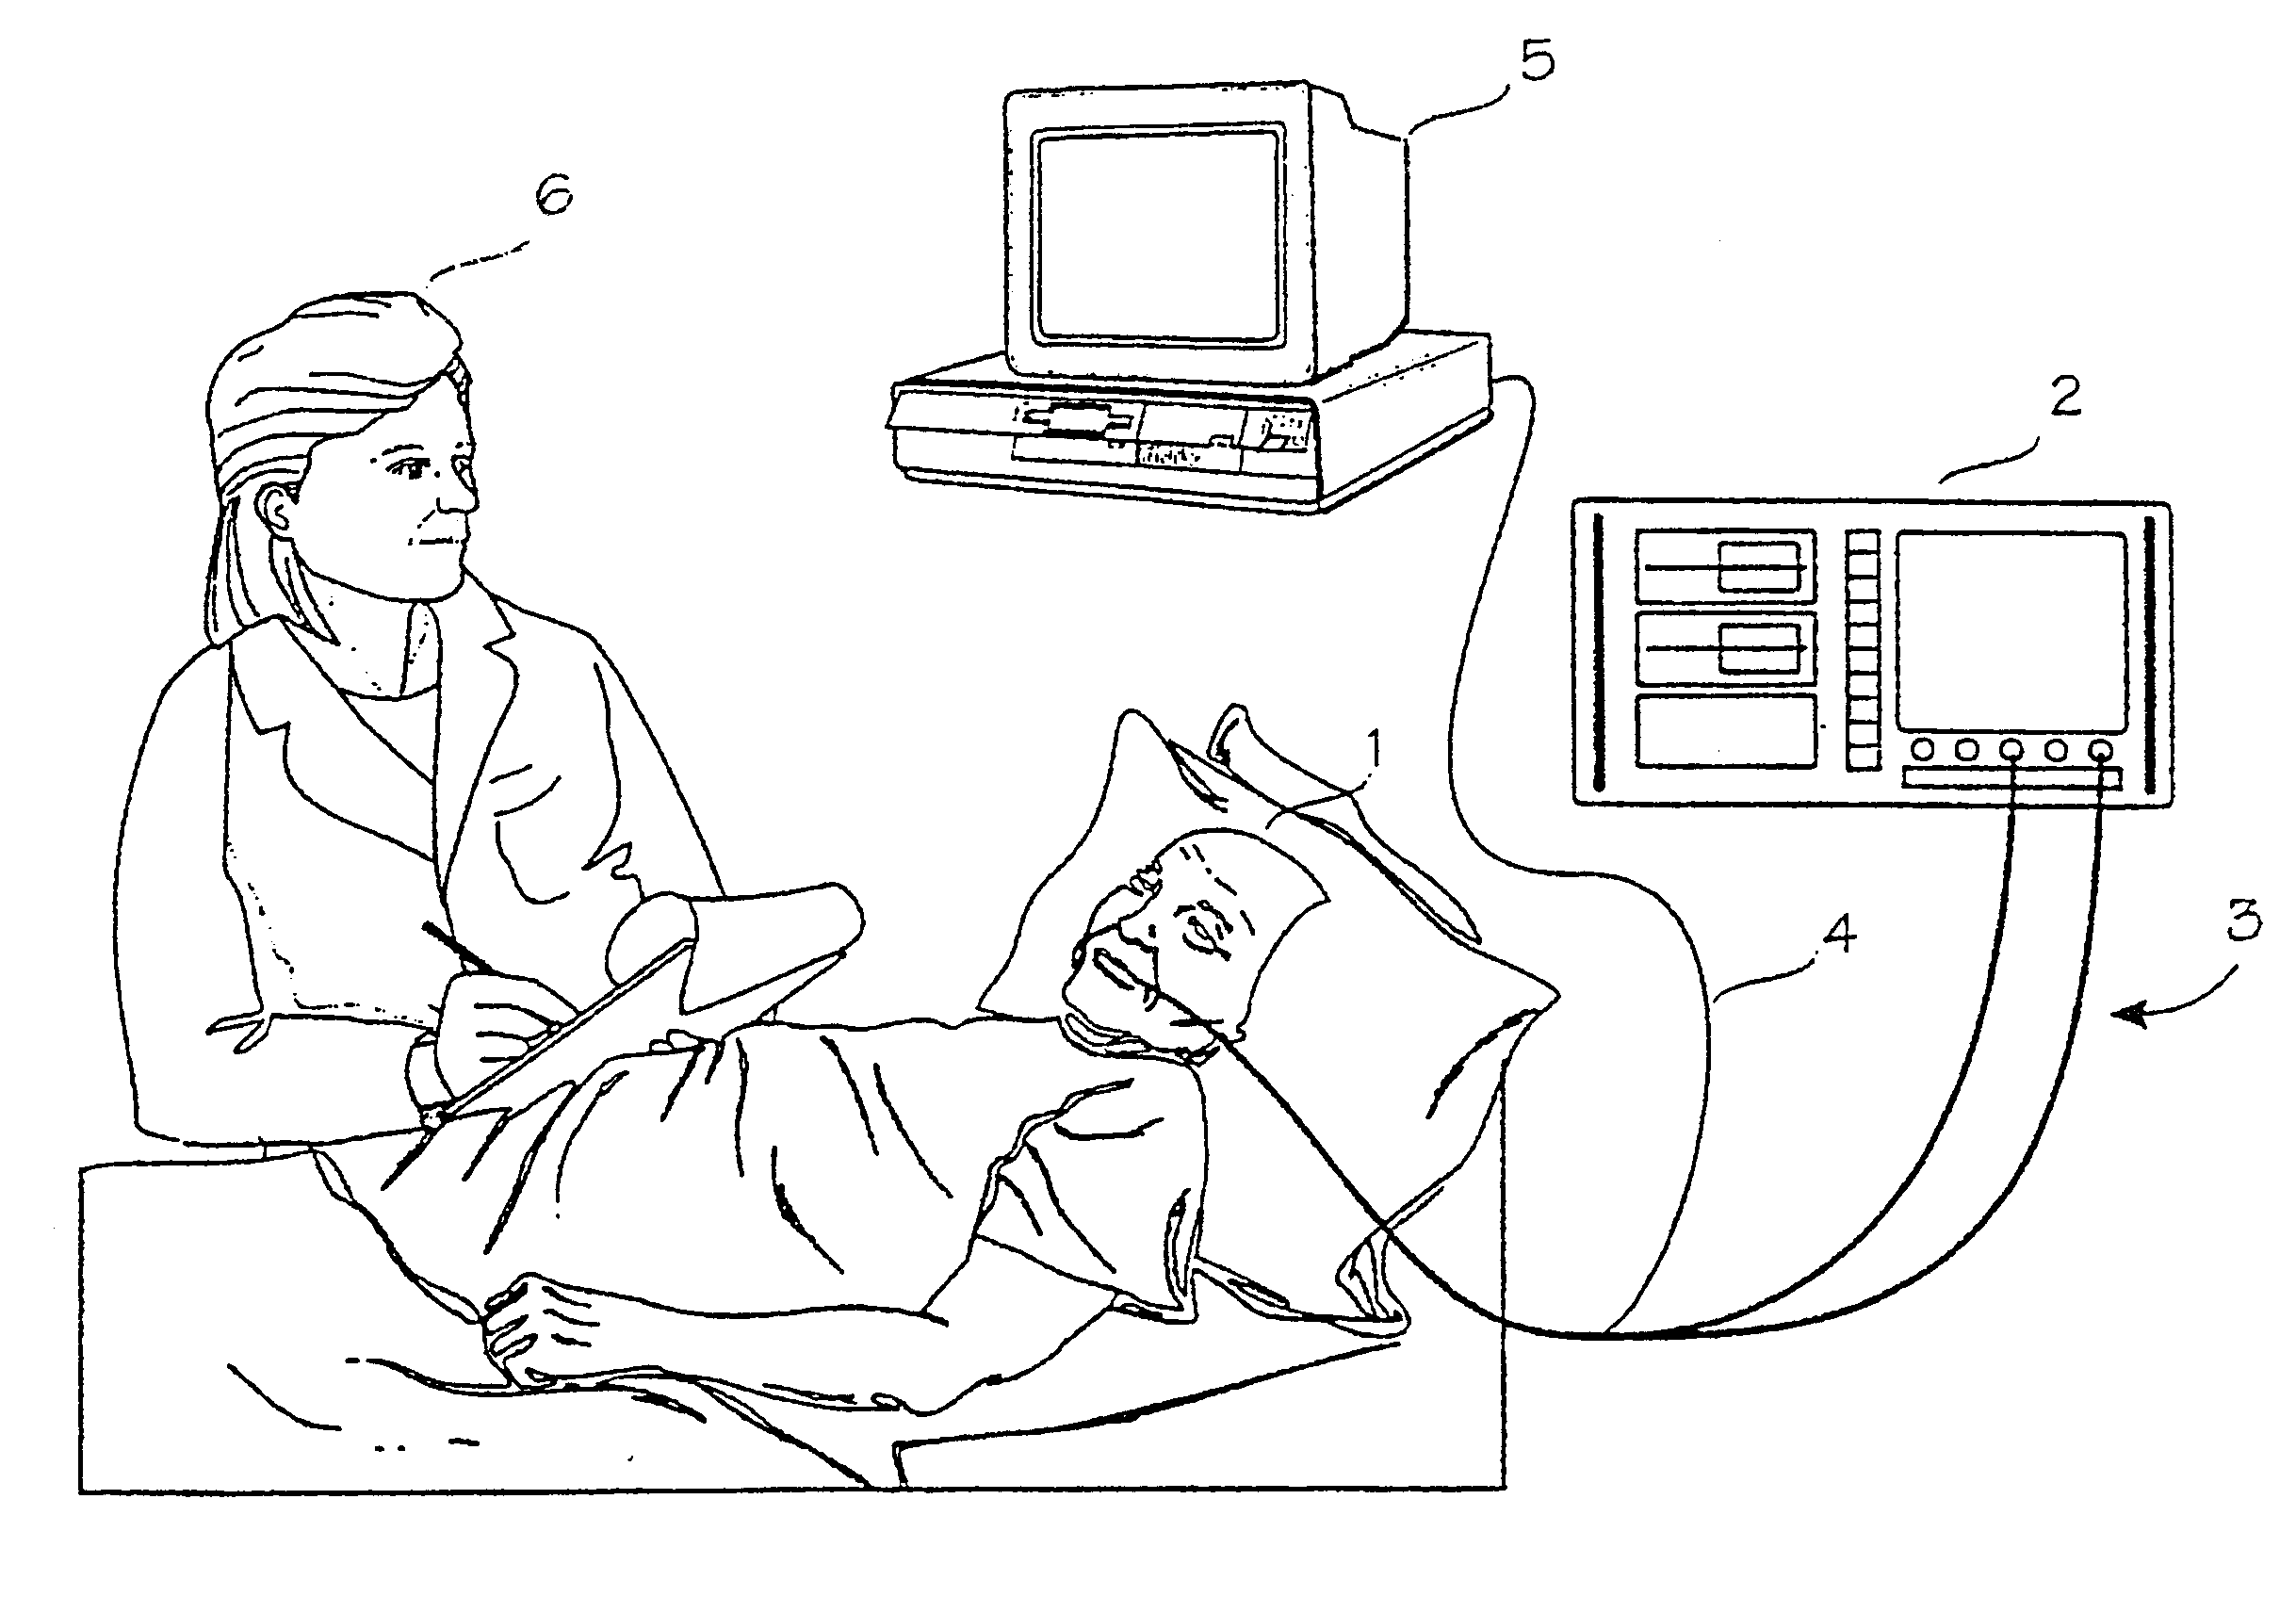 Arrangement in connection with equipment used in patient care